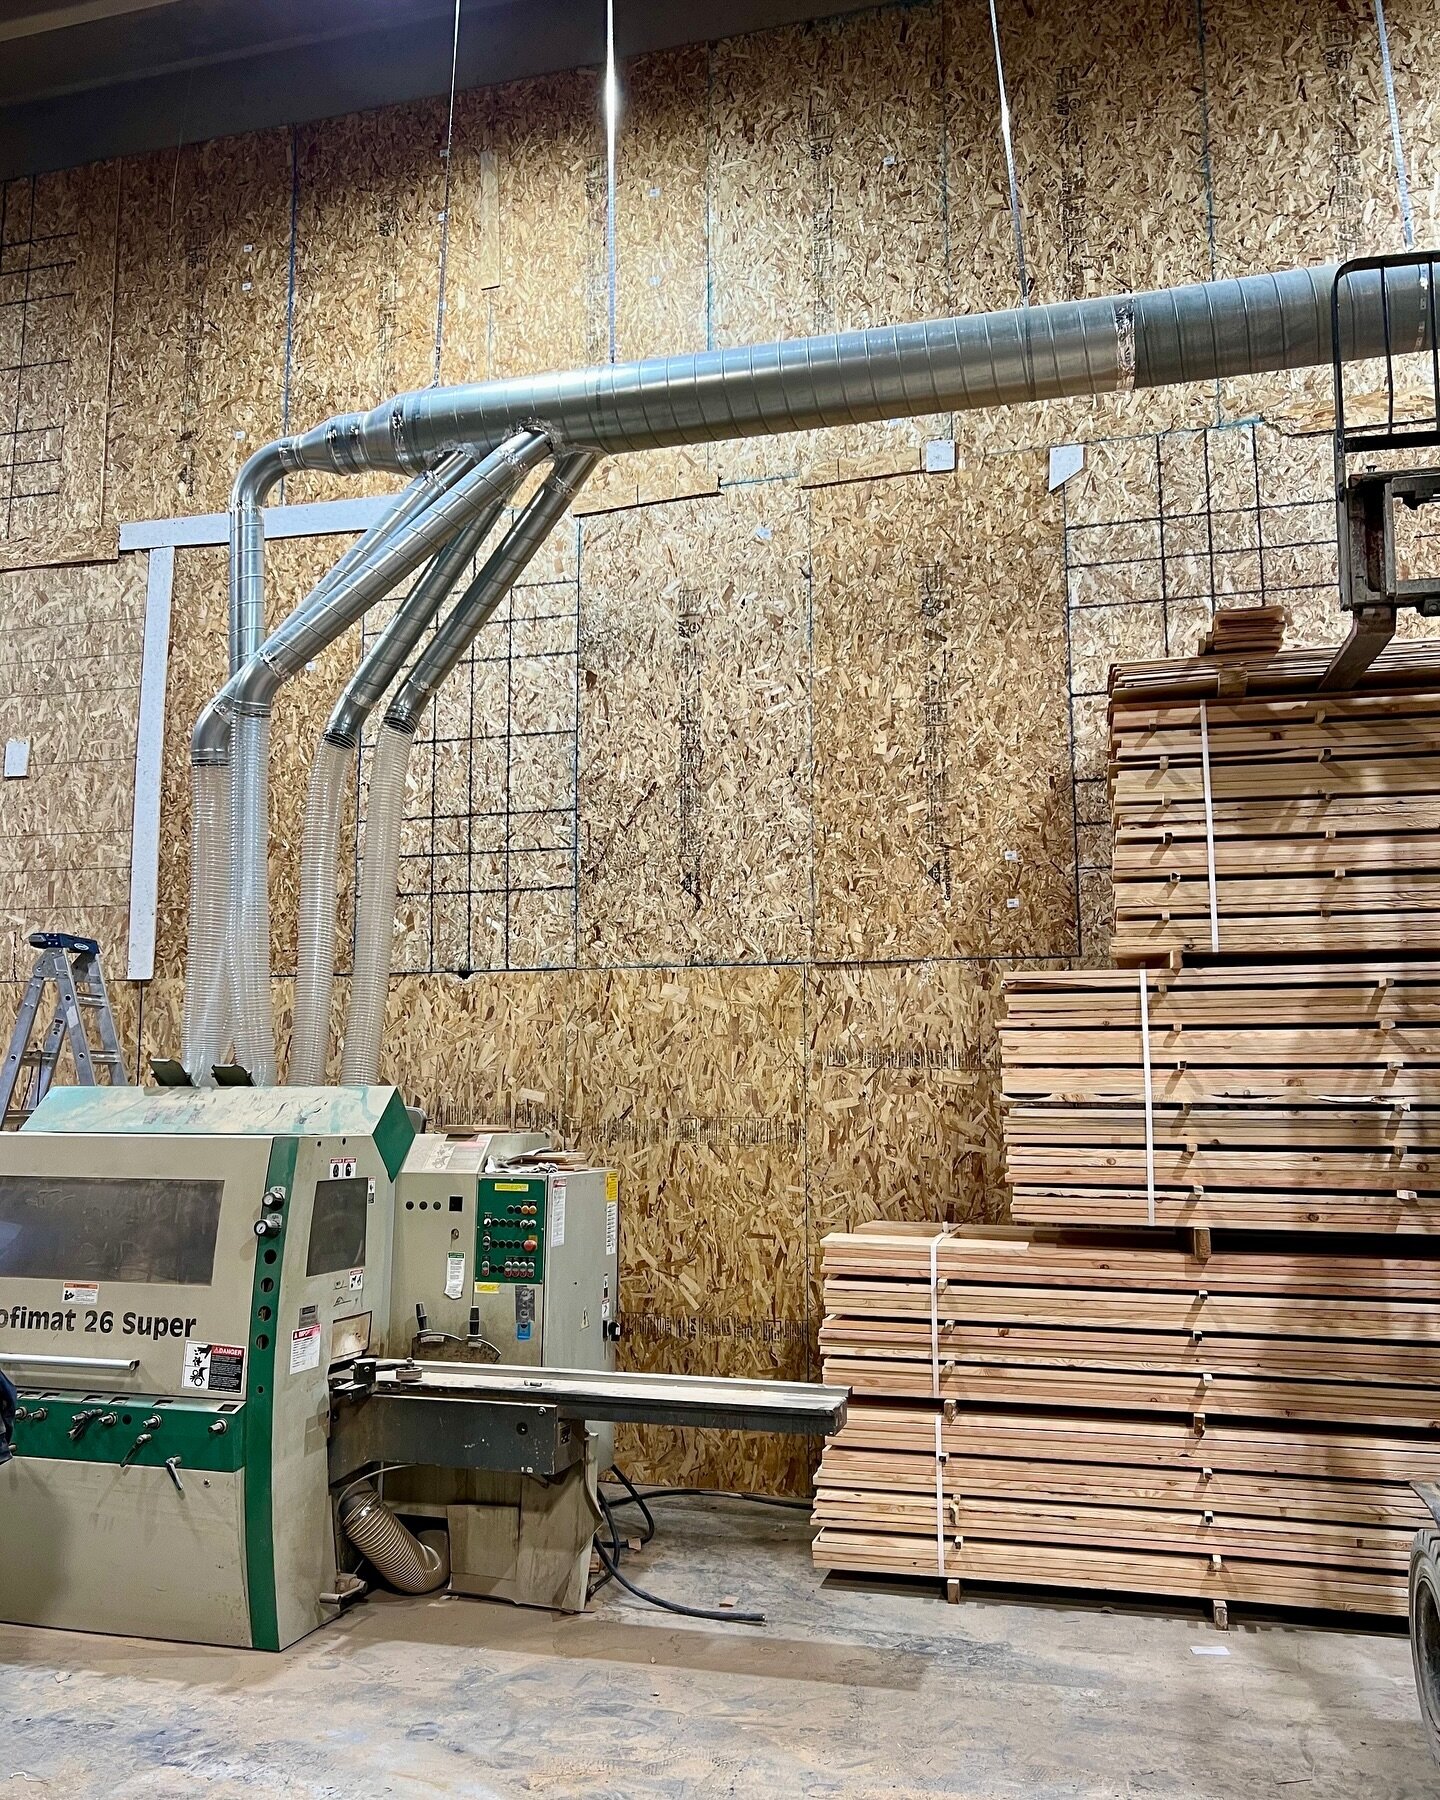 Our high capacity Moulder - great for milling wood siding, cladding, and flooring.